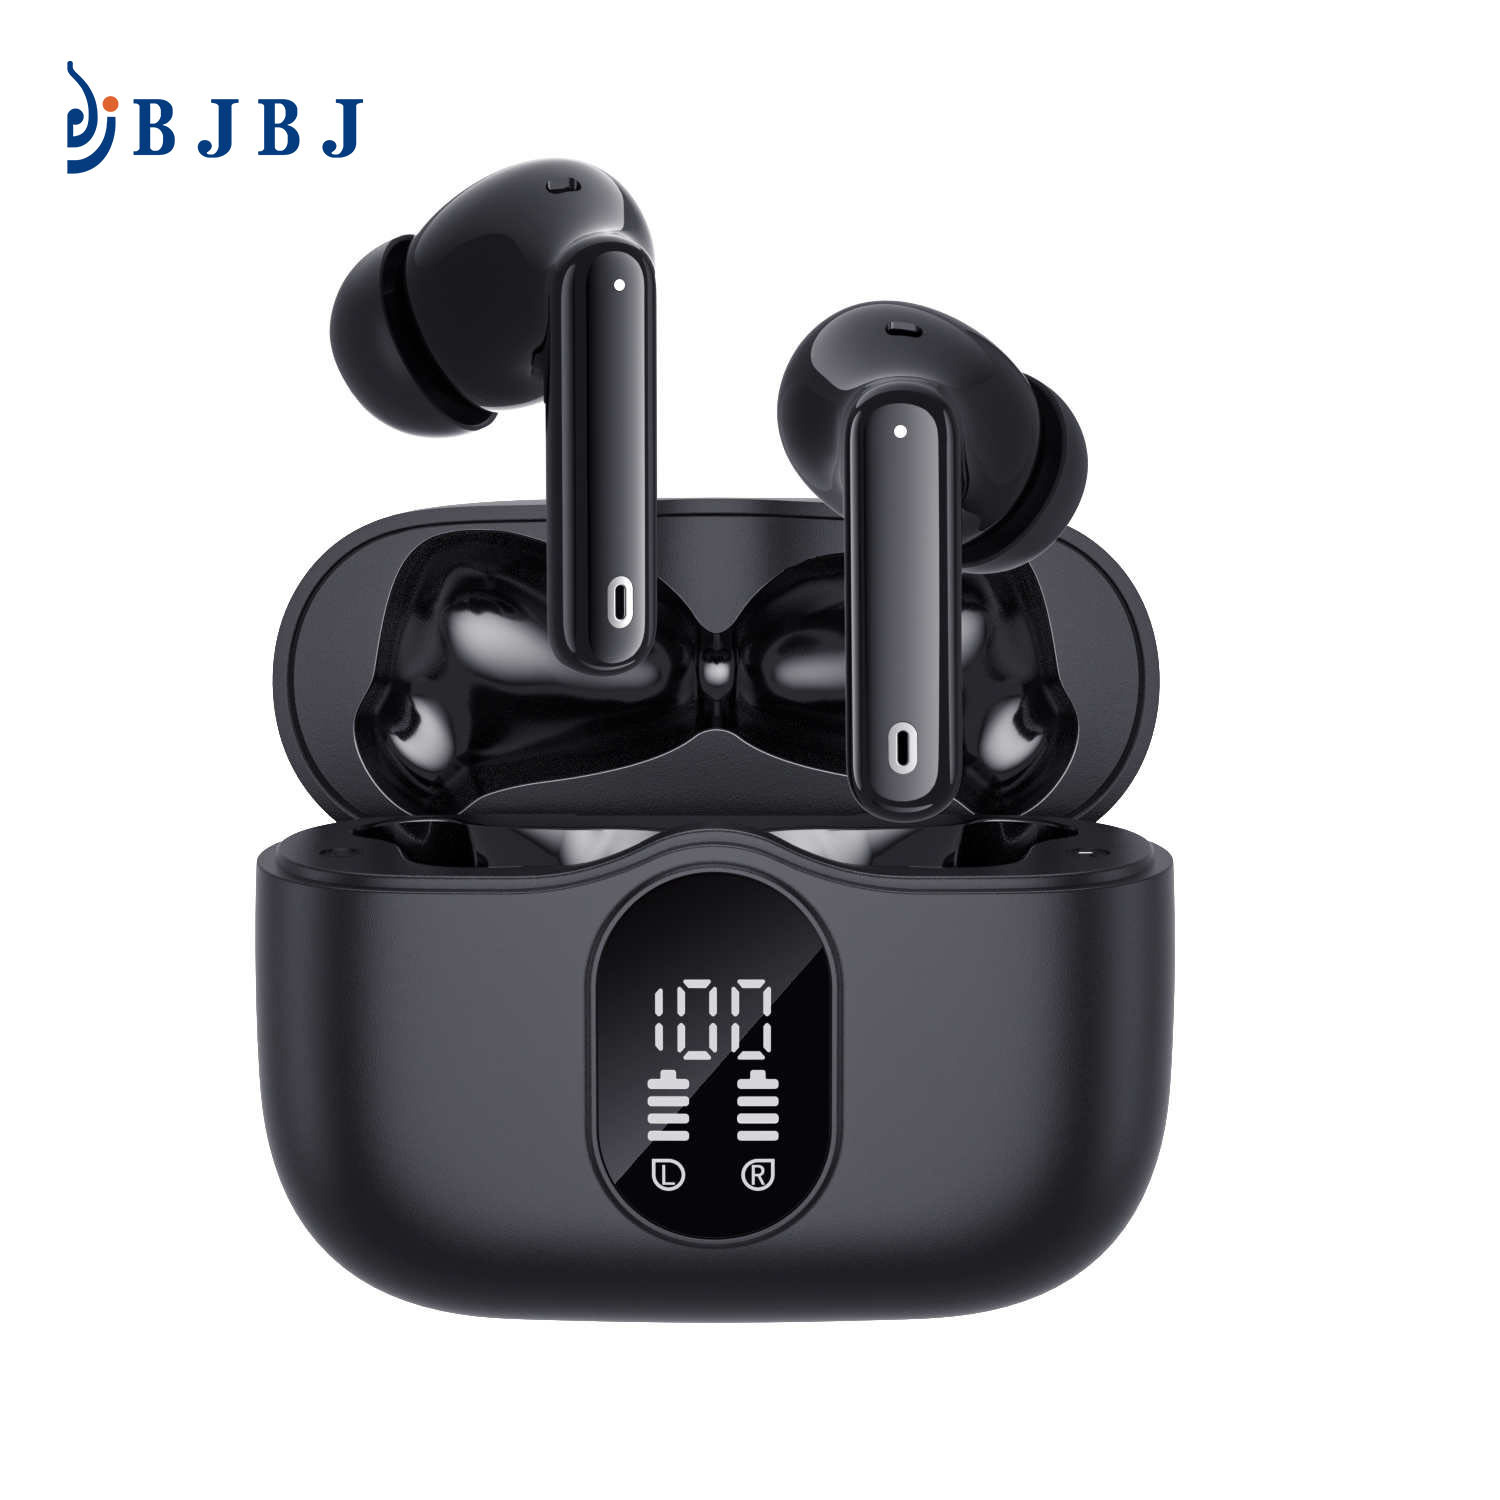 Wireless Earbuds for Android